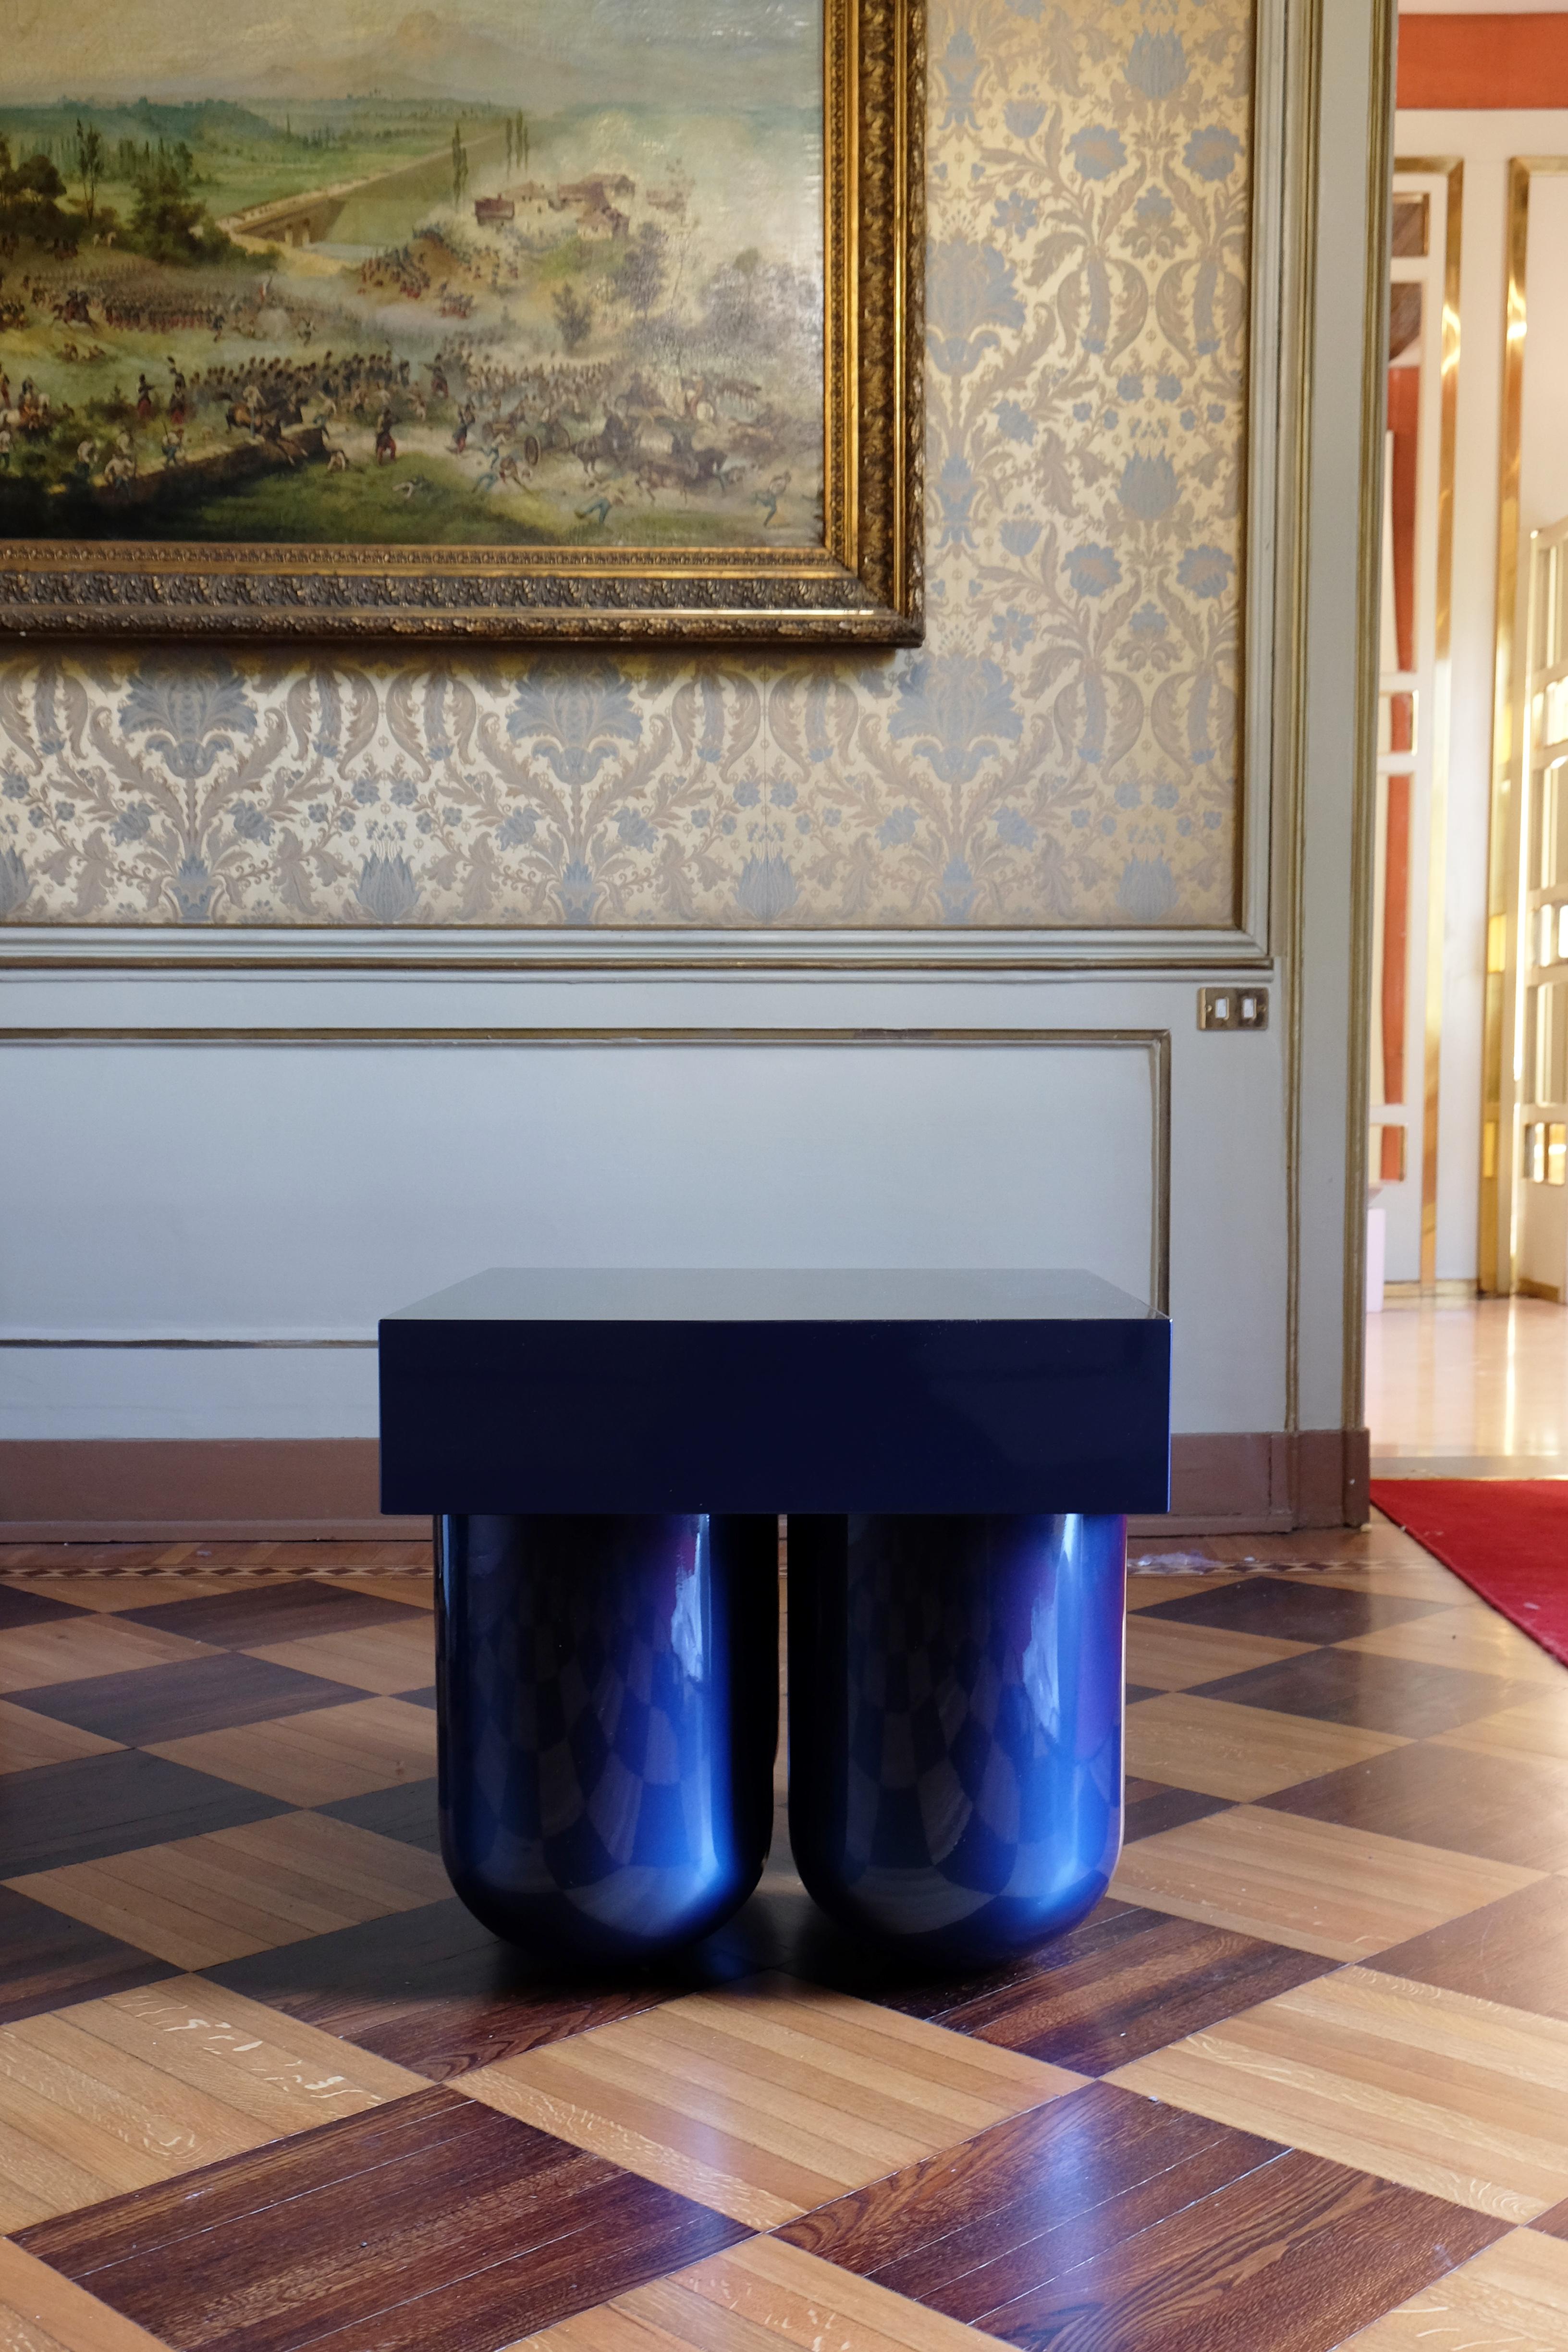 Pair of carved wood set No. 5 tables by Müsing-Sellés
Dimensions: W 60 x D 60 x H 60 cm
Materials: Carved wood, high gloss car-paint metallic lacquer
Color: Red and blue Gradient
Custom color (additional cost & lead time)

Müsing–Sellés is a